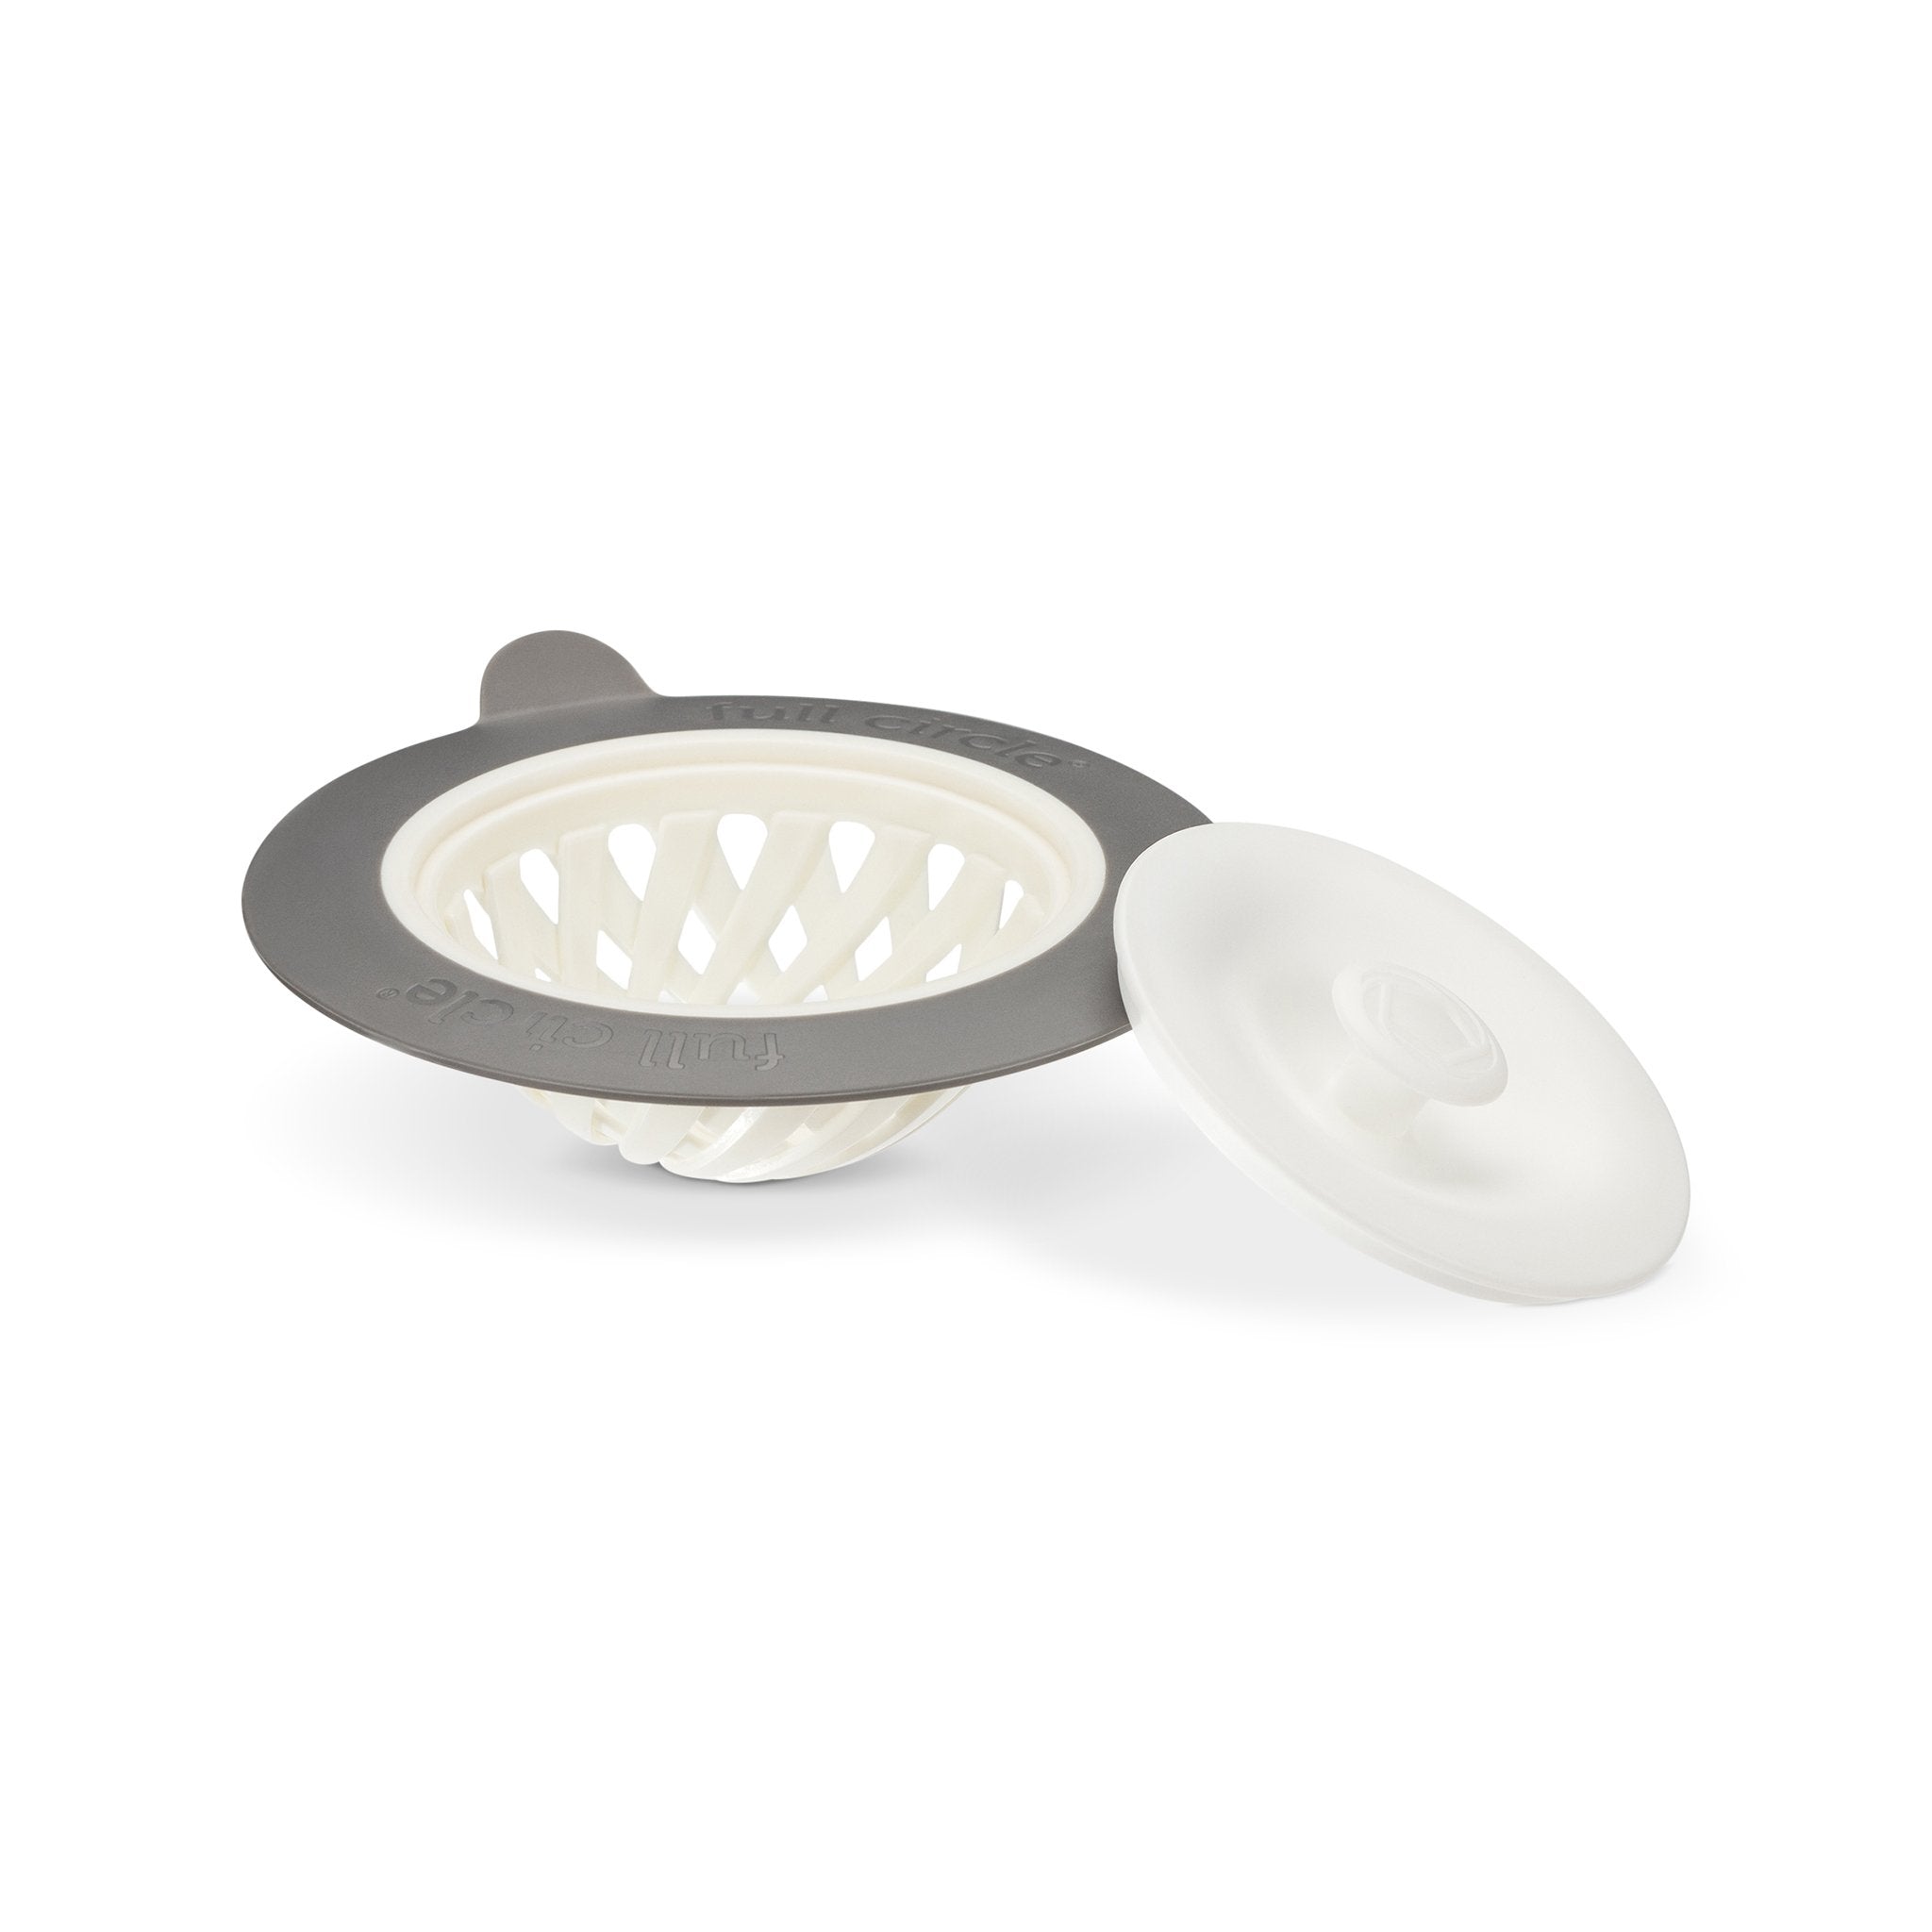 Full Circle Sinksational Sink Strainer, with Pop-Out Stopper